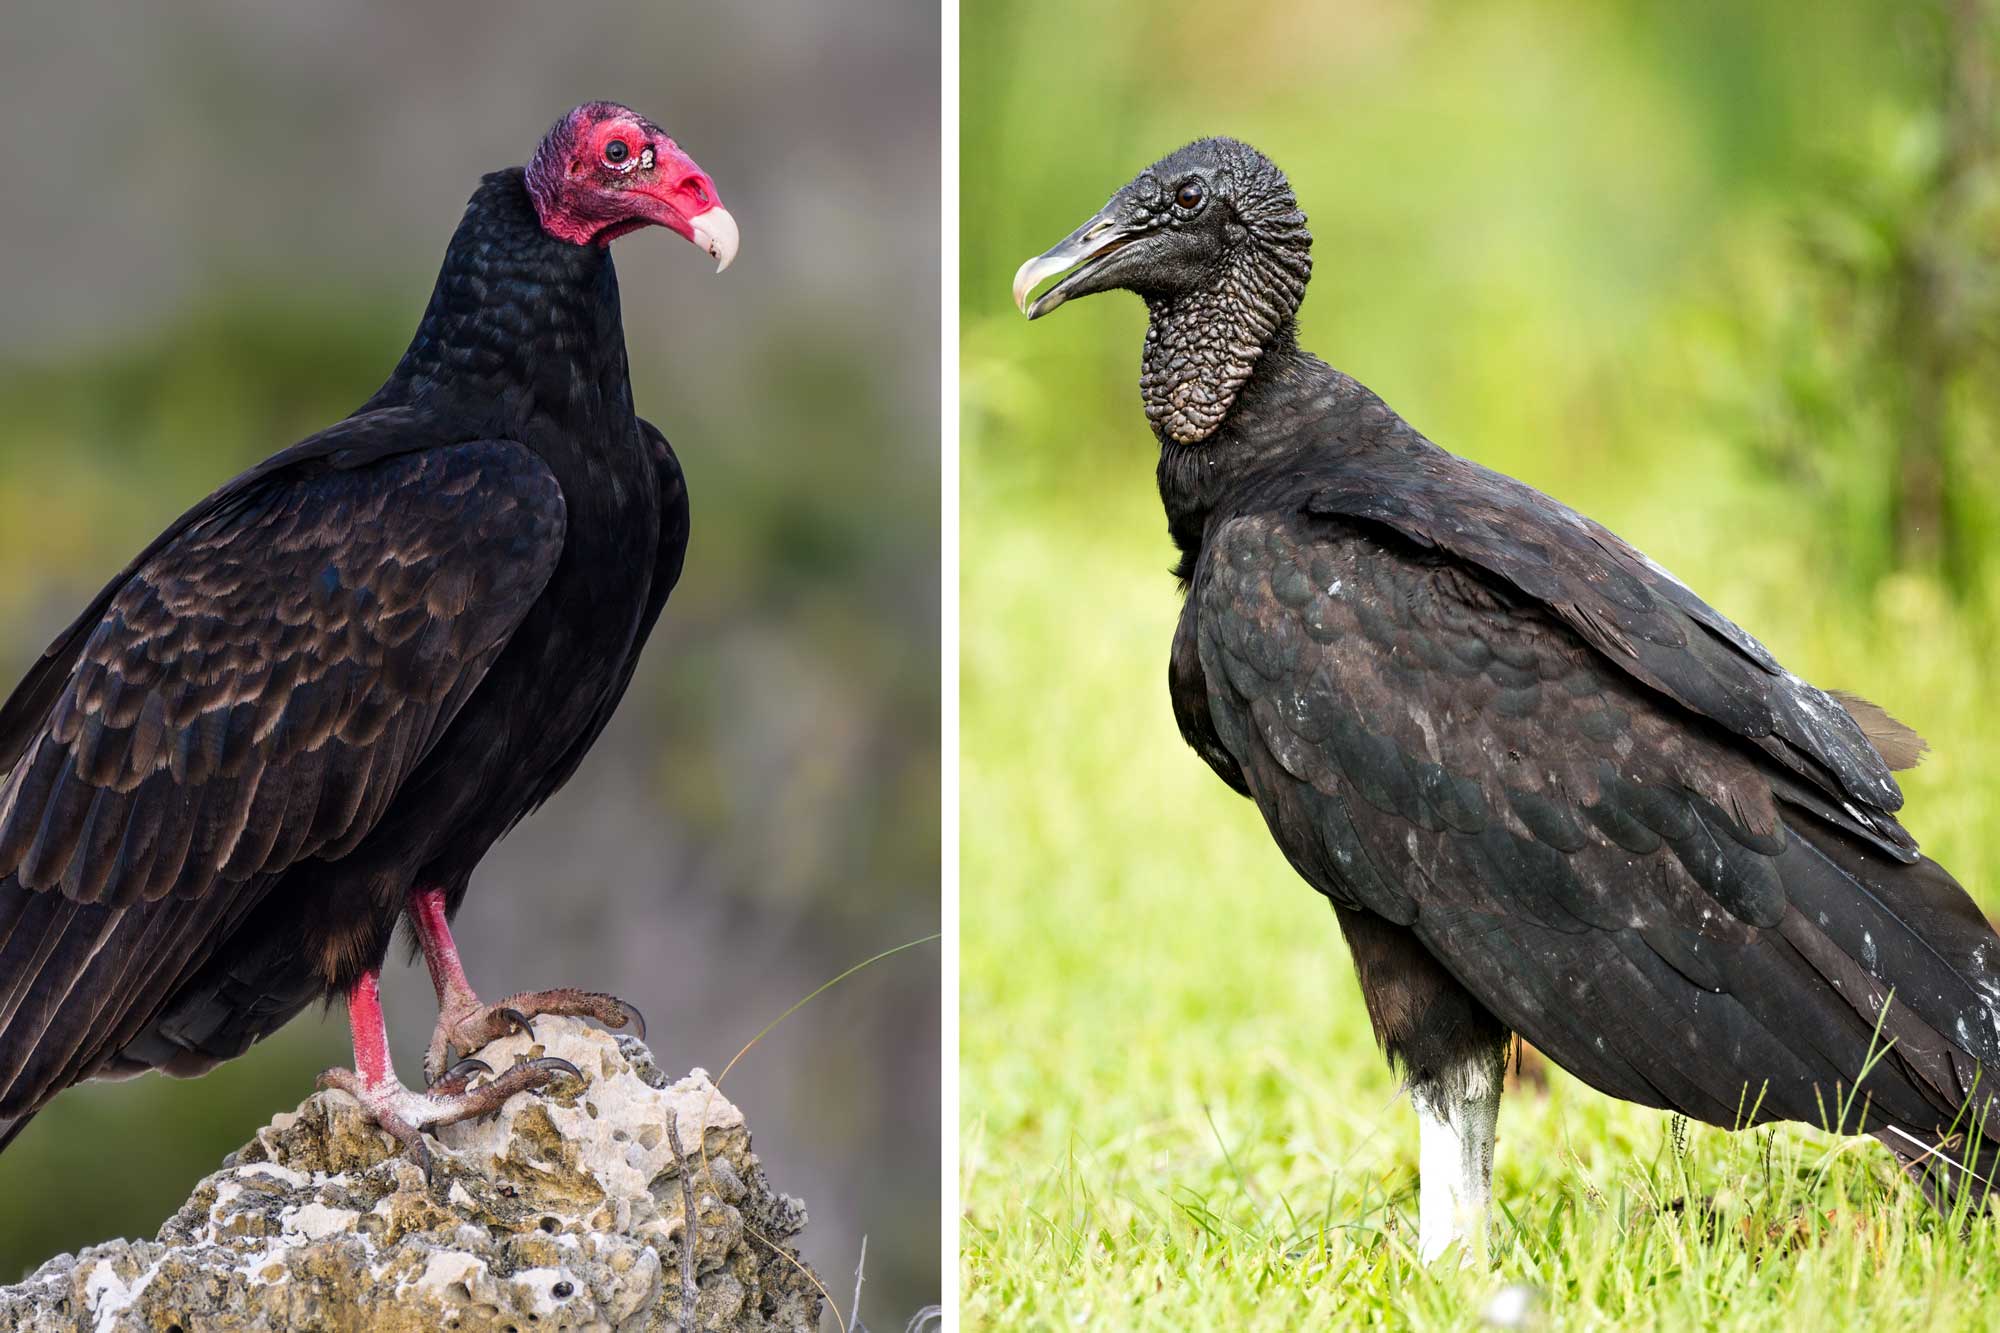  A side-by-side comparison of a turkey vulture and black vulture